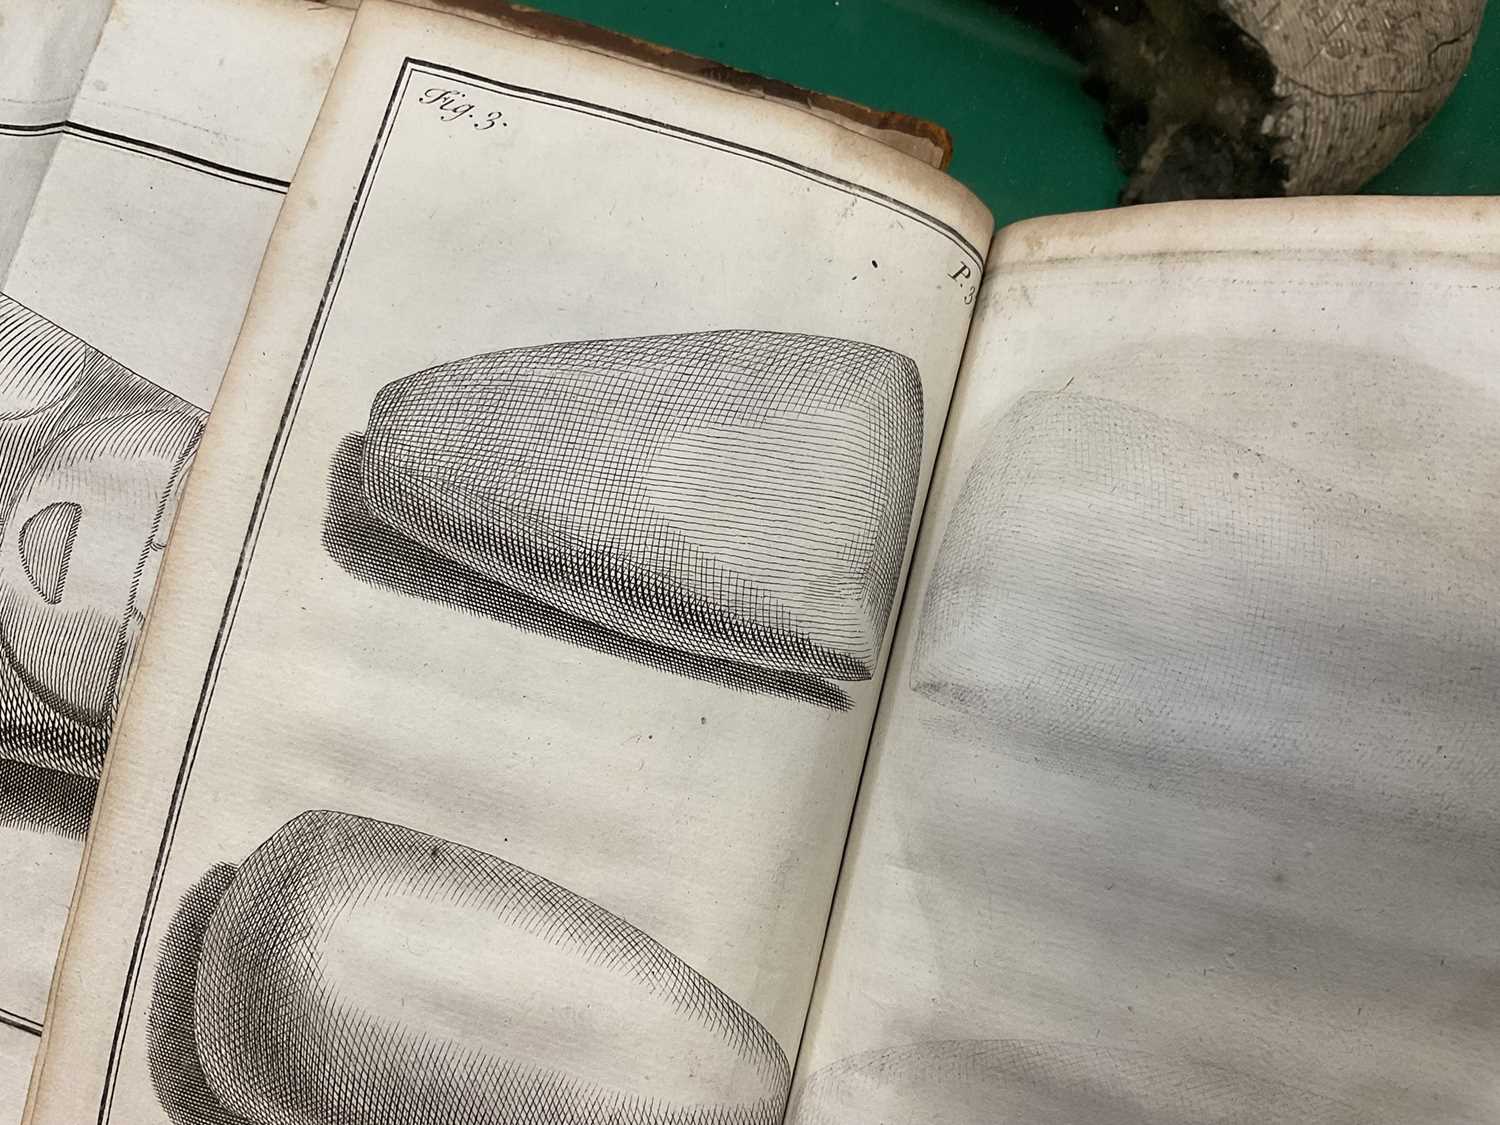 John Woodward - Fossils of all Kinds, 1728 first edition - Image 8 of 18